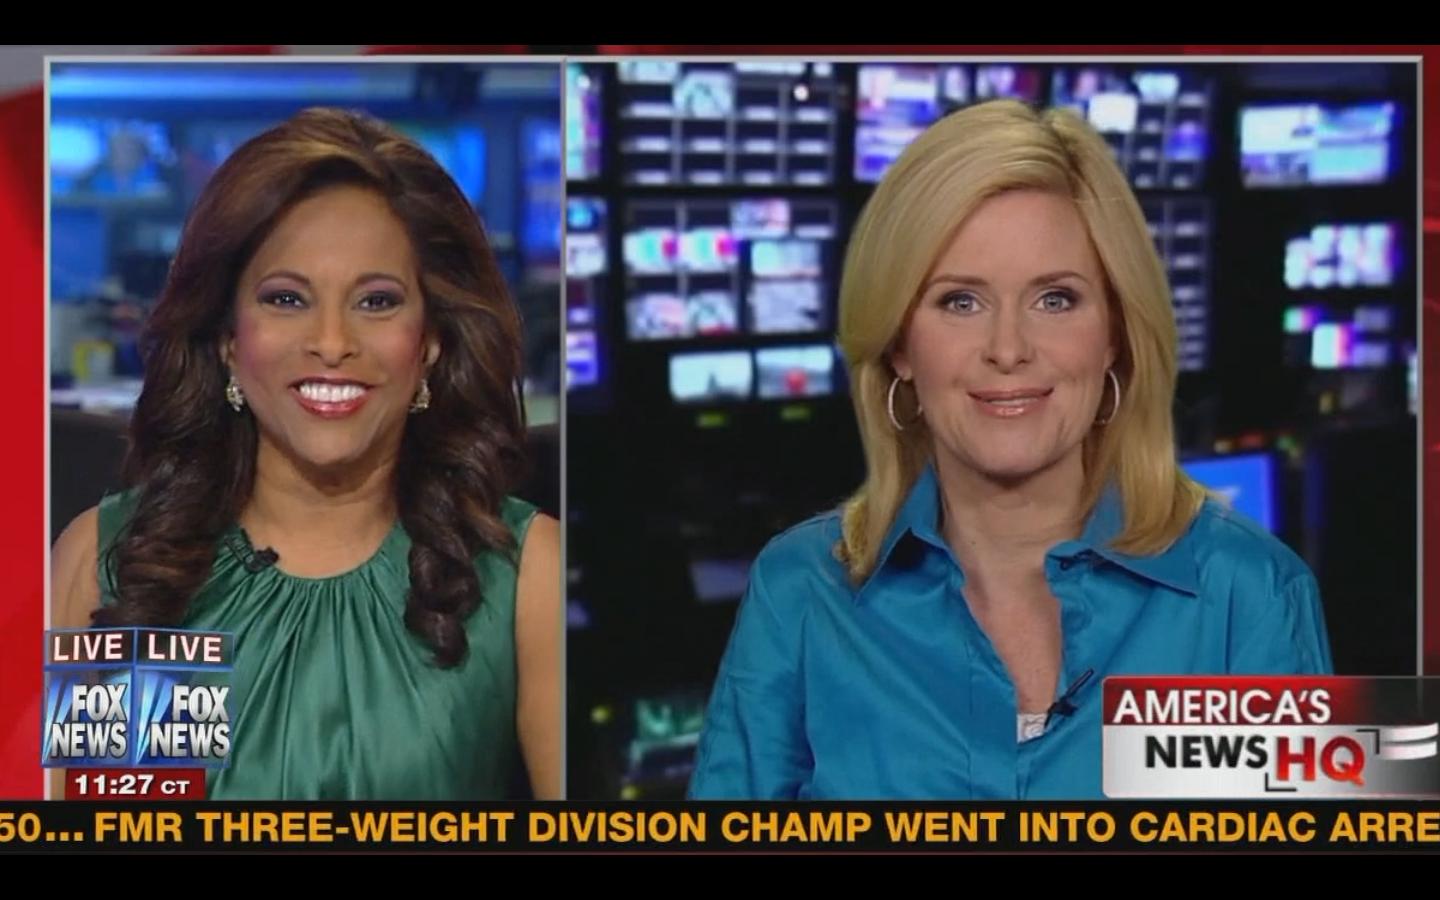 Ladies in Satin Blouses: unknown fox news anchor in light blue silk blouse